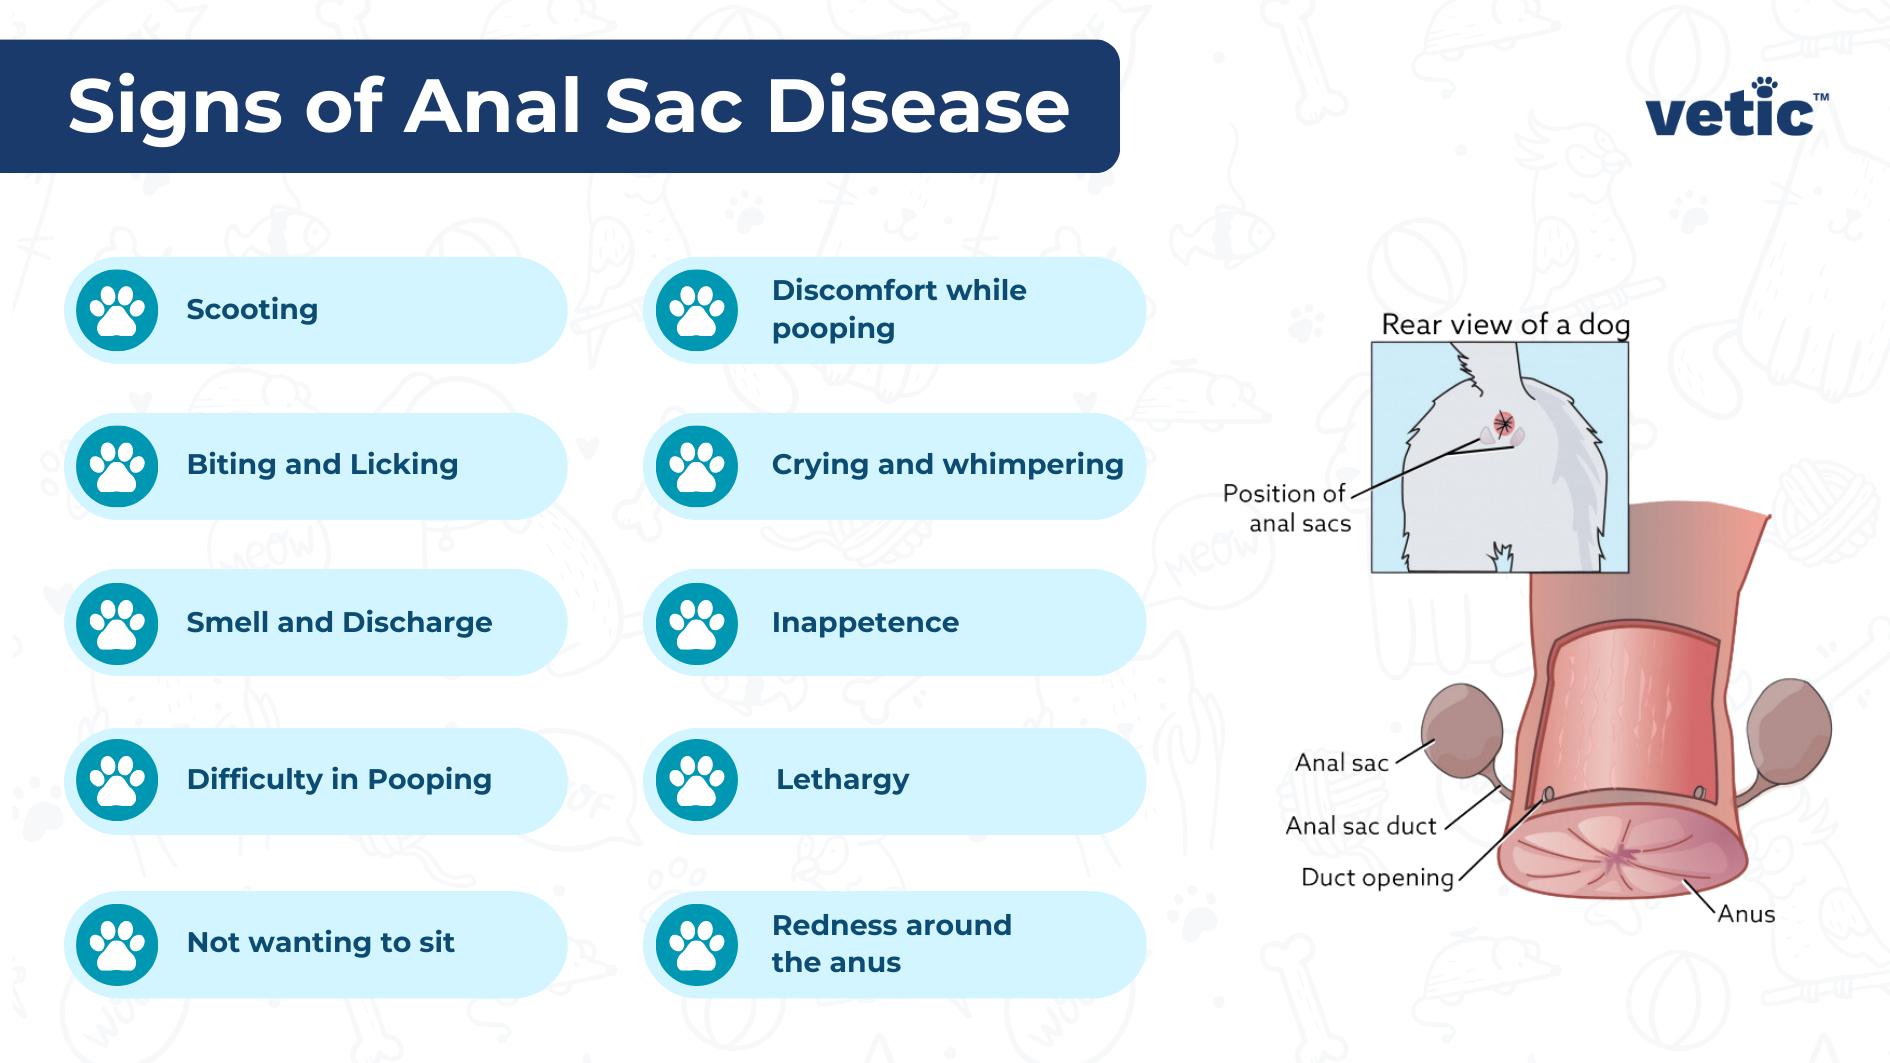 Signs of anal sac or anal gland disease in dogs - Scooting Biting and Licking Smell and Discharge Difficulty in Pooping Not wanting to sit Discomfort while pooping Crying and whimpering Inappetence Lethargy Redness around the anus